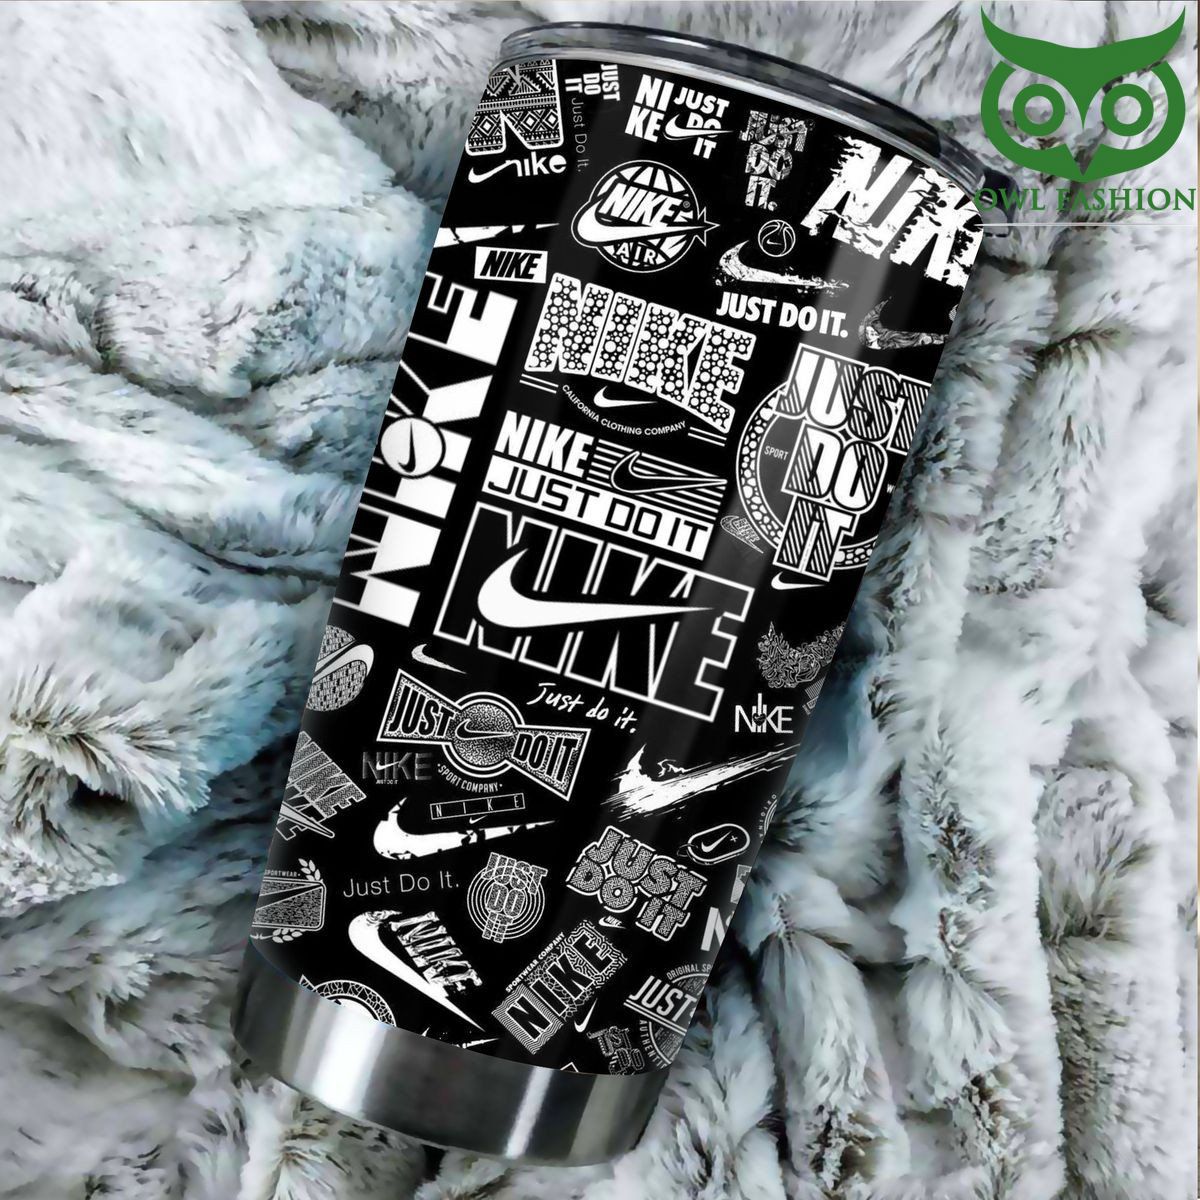 Nike Just do it basketball pattern tumbler cup